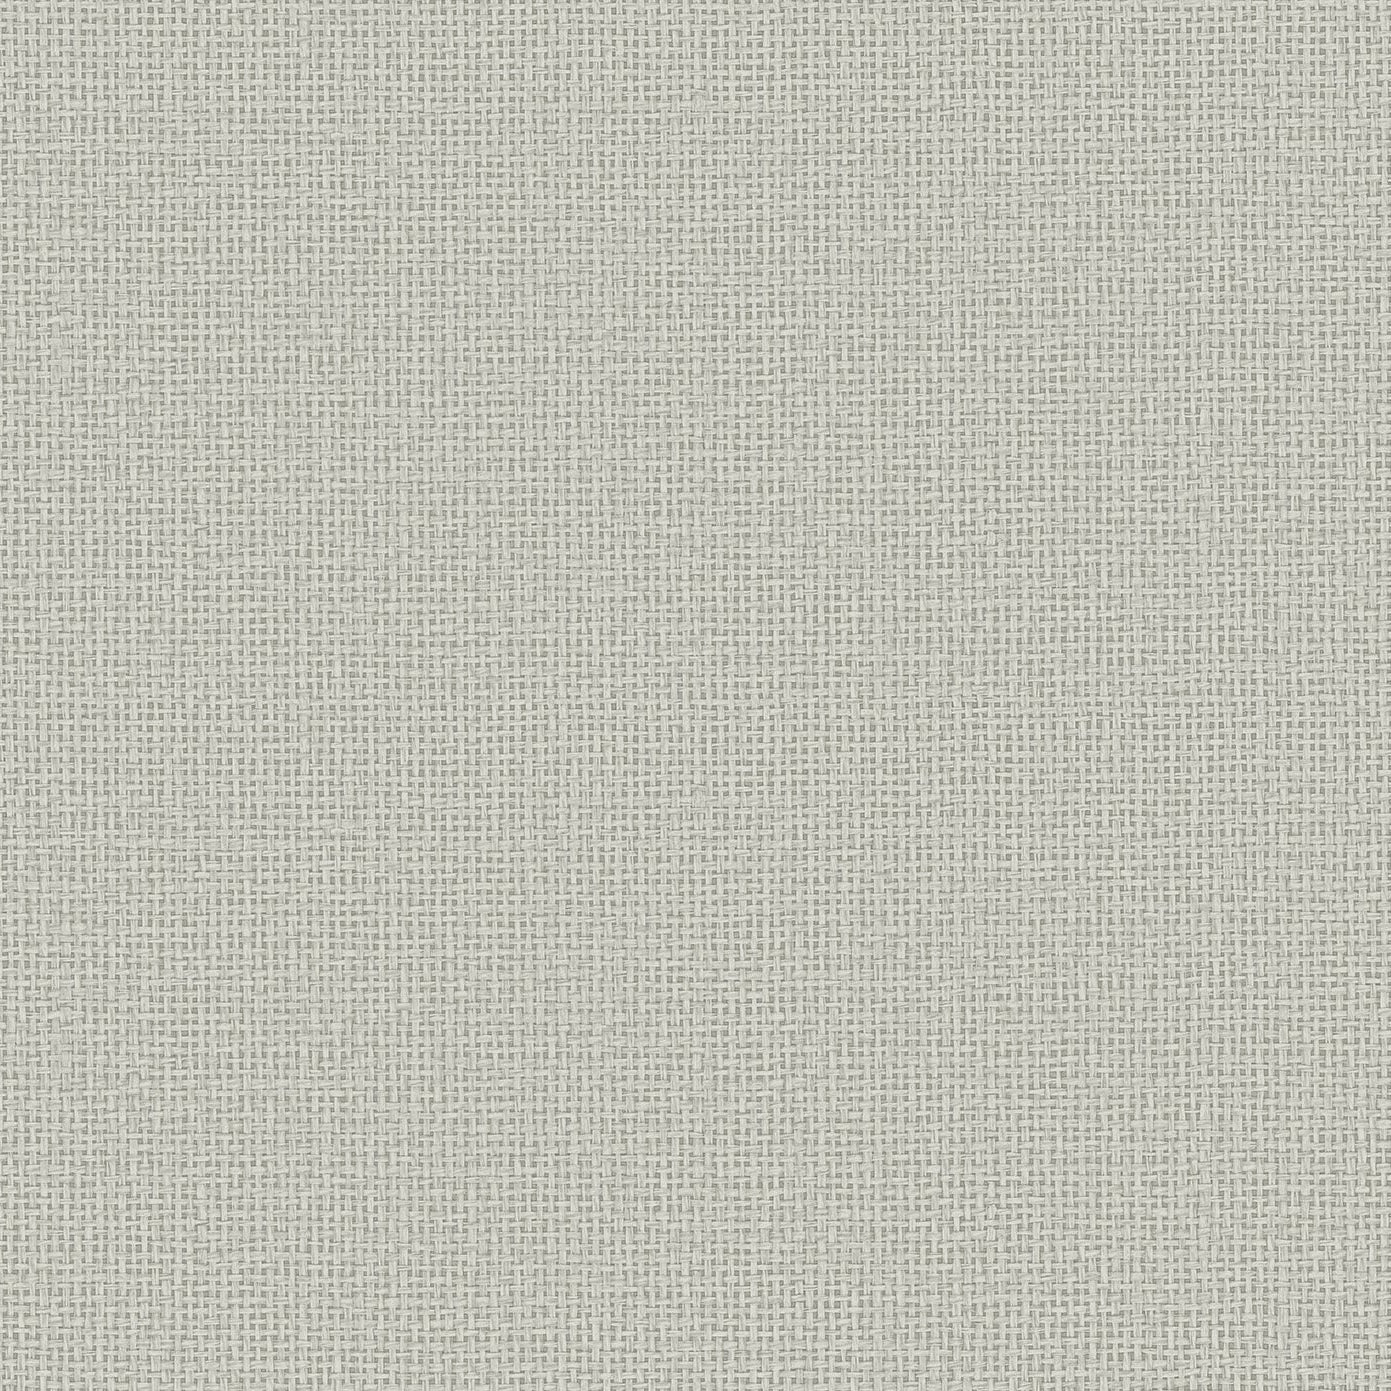 View 2927-81008 Newport Marblehead Taupe Crosshatched Grasscloth Taupe A-Street Prints Wallpaper